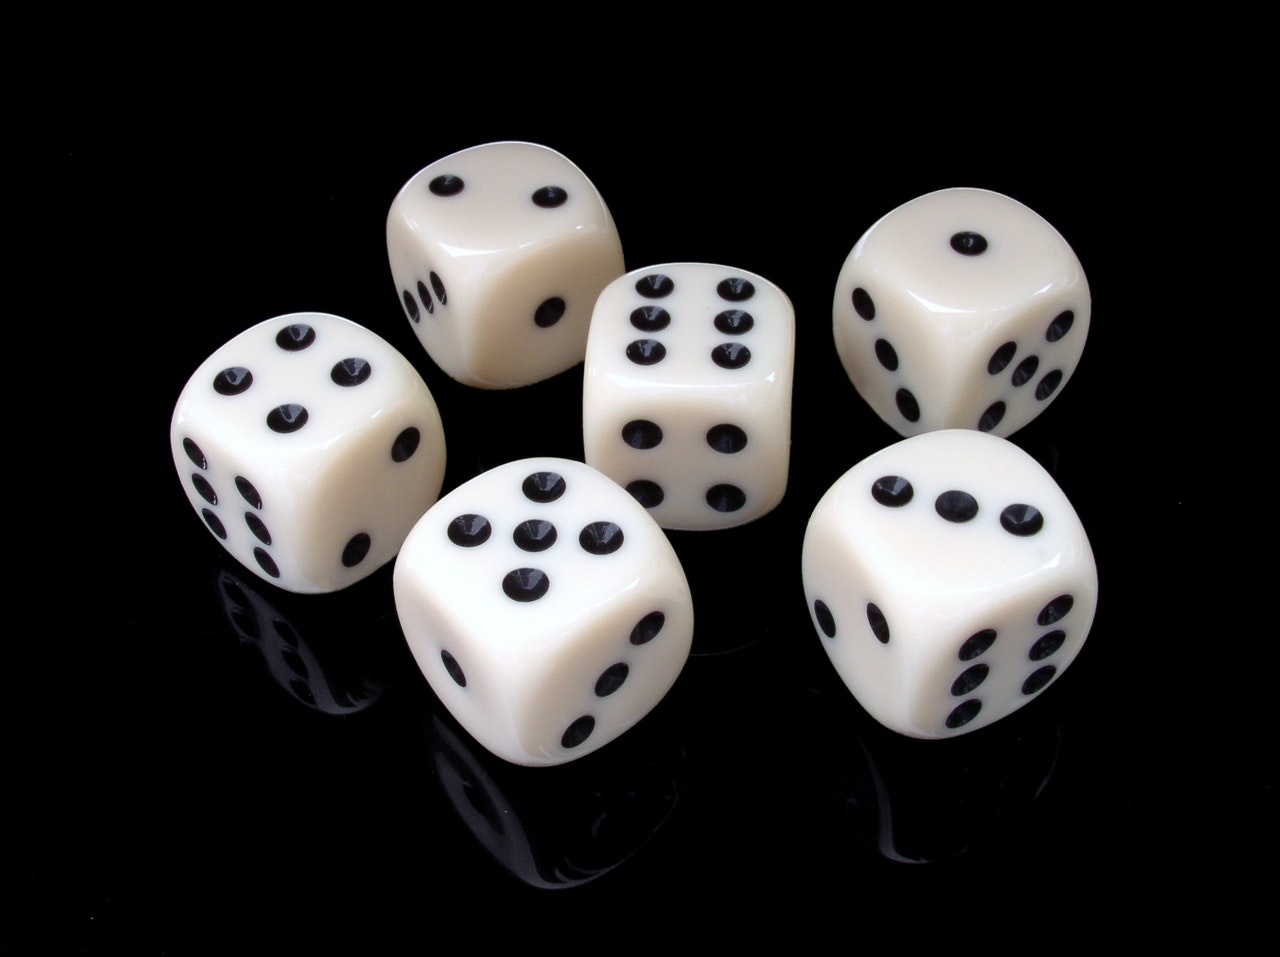 6 Pieces of Black and White Dice